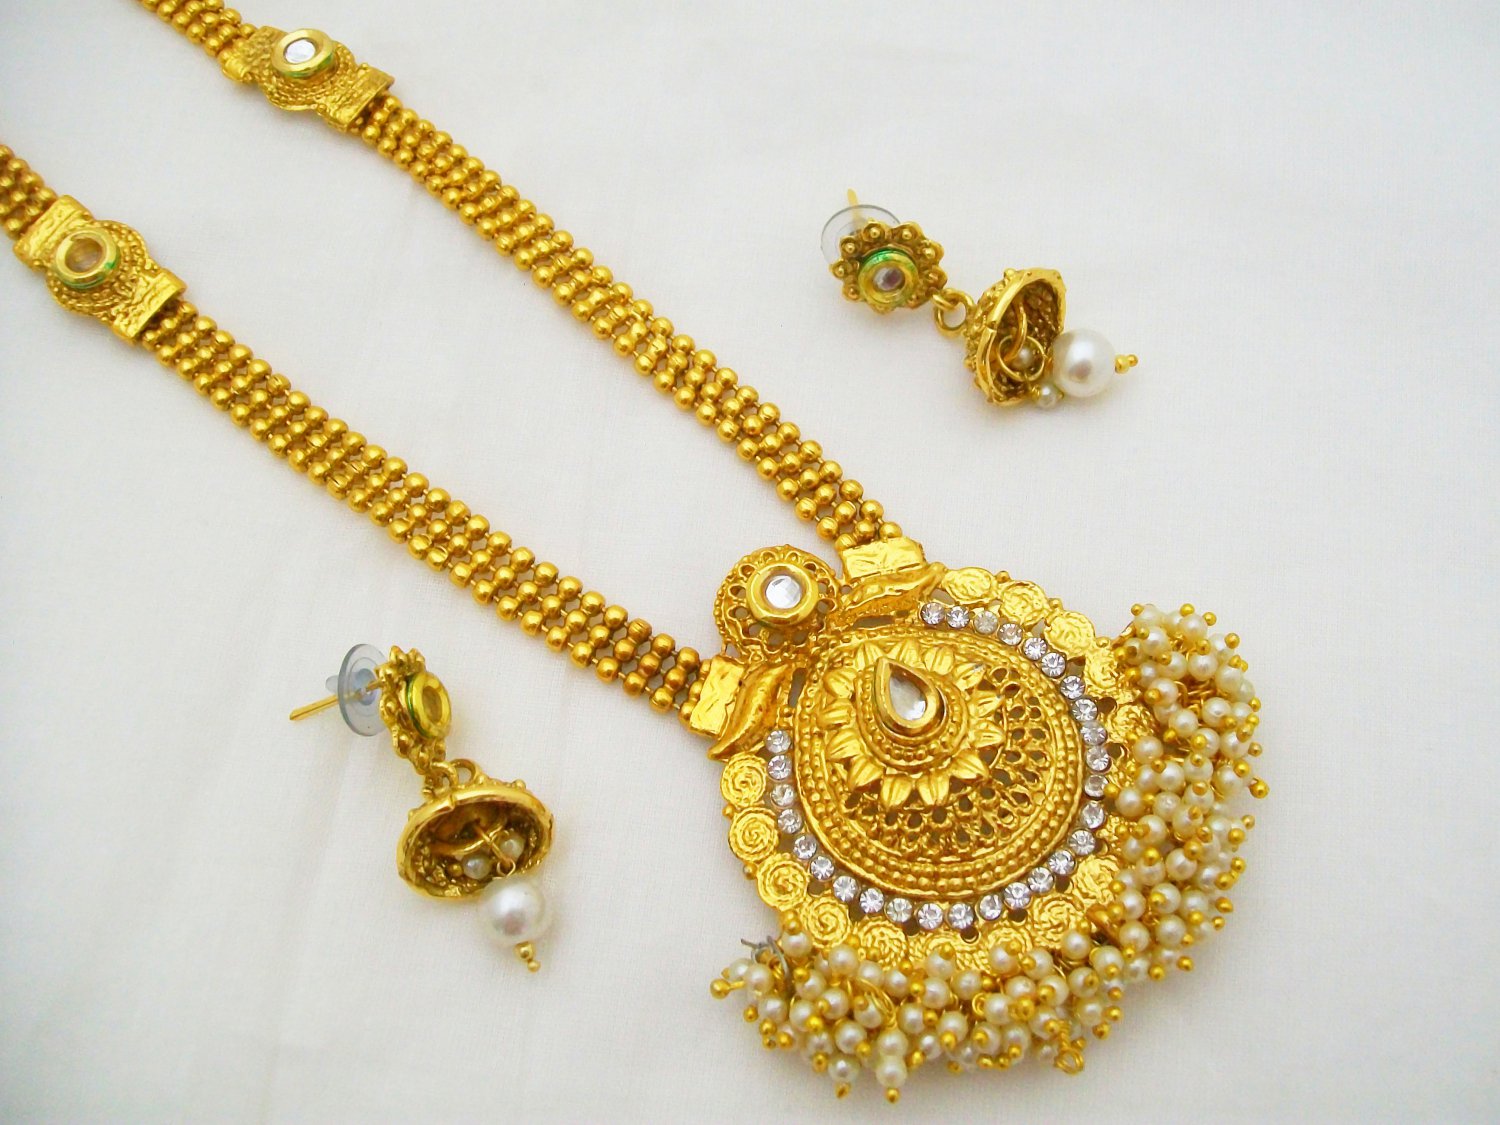 Rani Haar Long Pearl Gold Plated Necklace Set Vintage Indian Wedding Jewelry